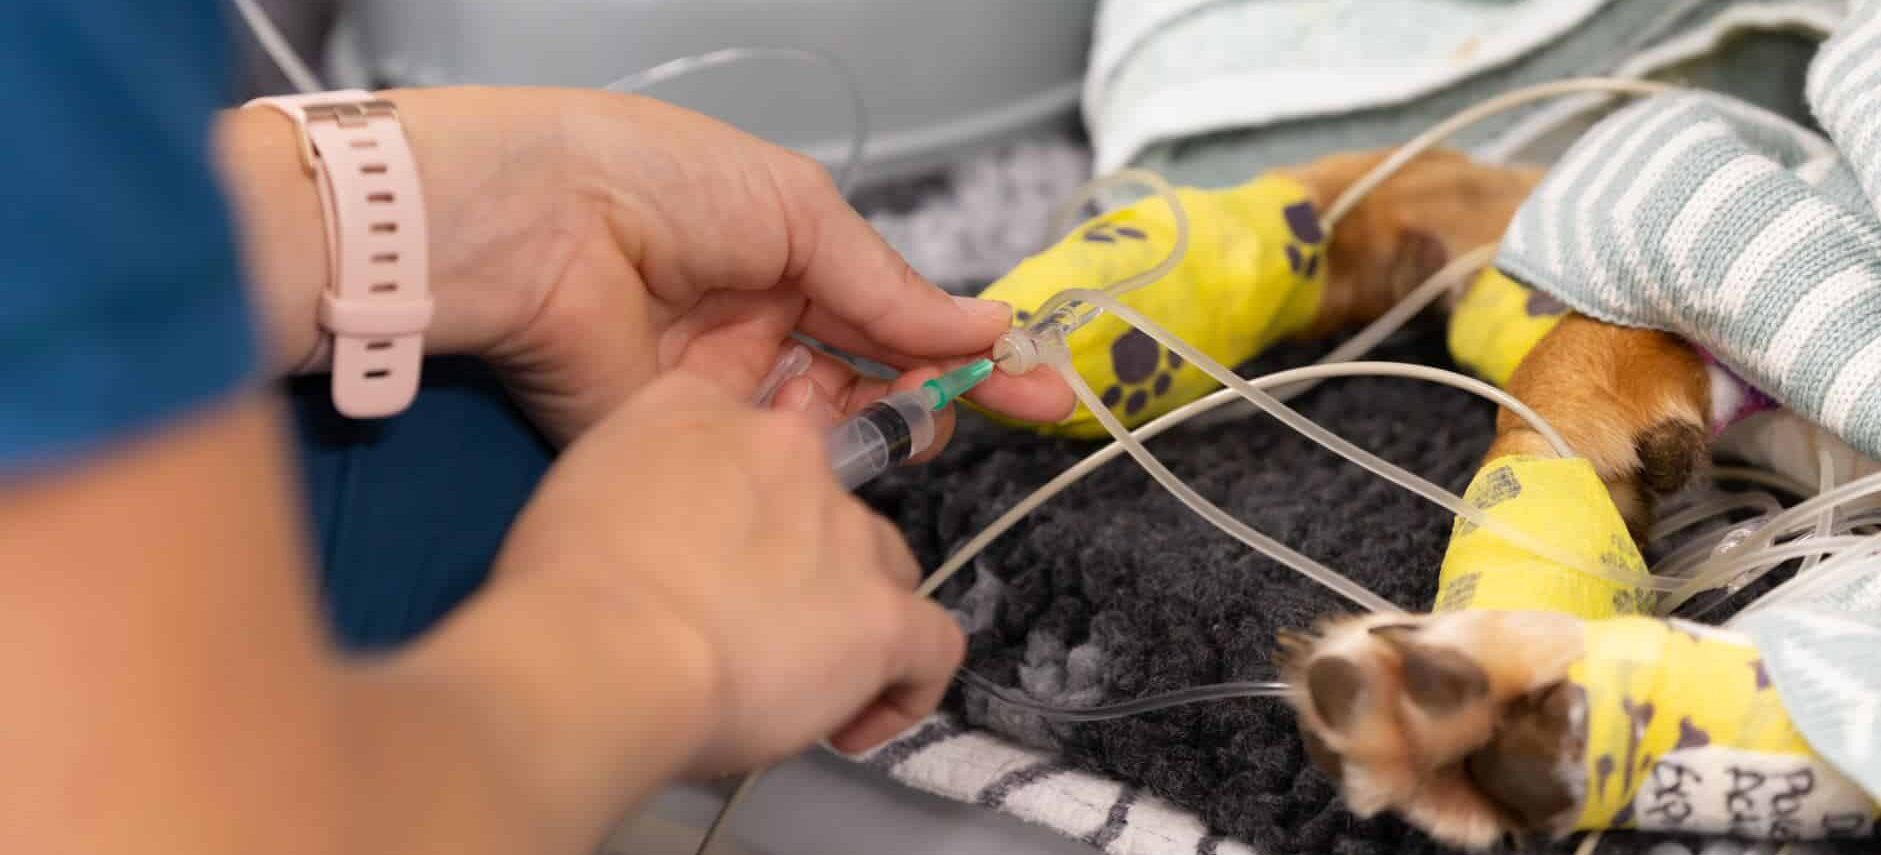 dog getting injection into iv port